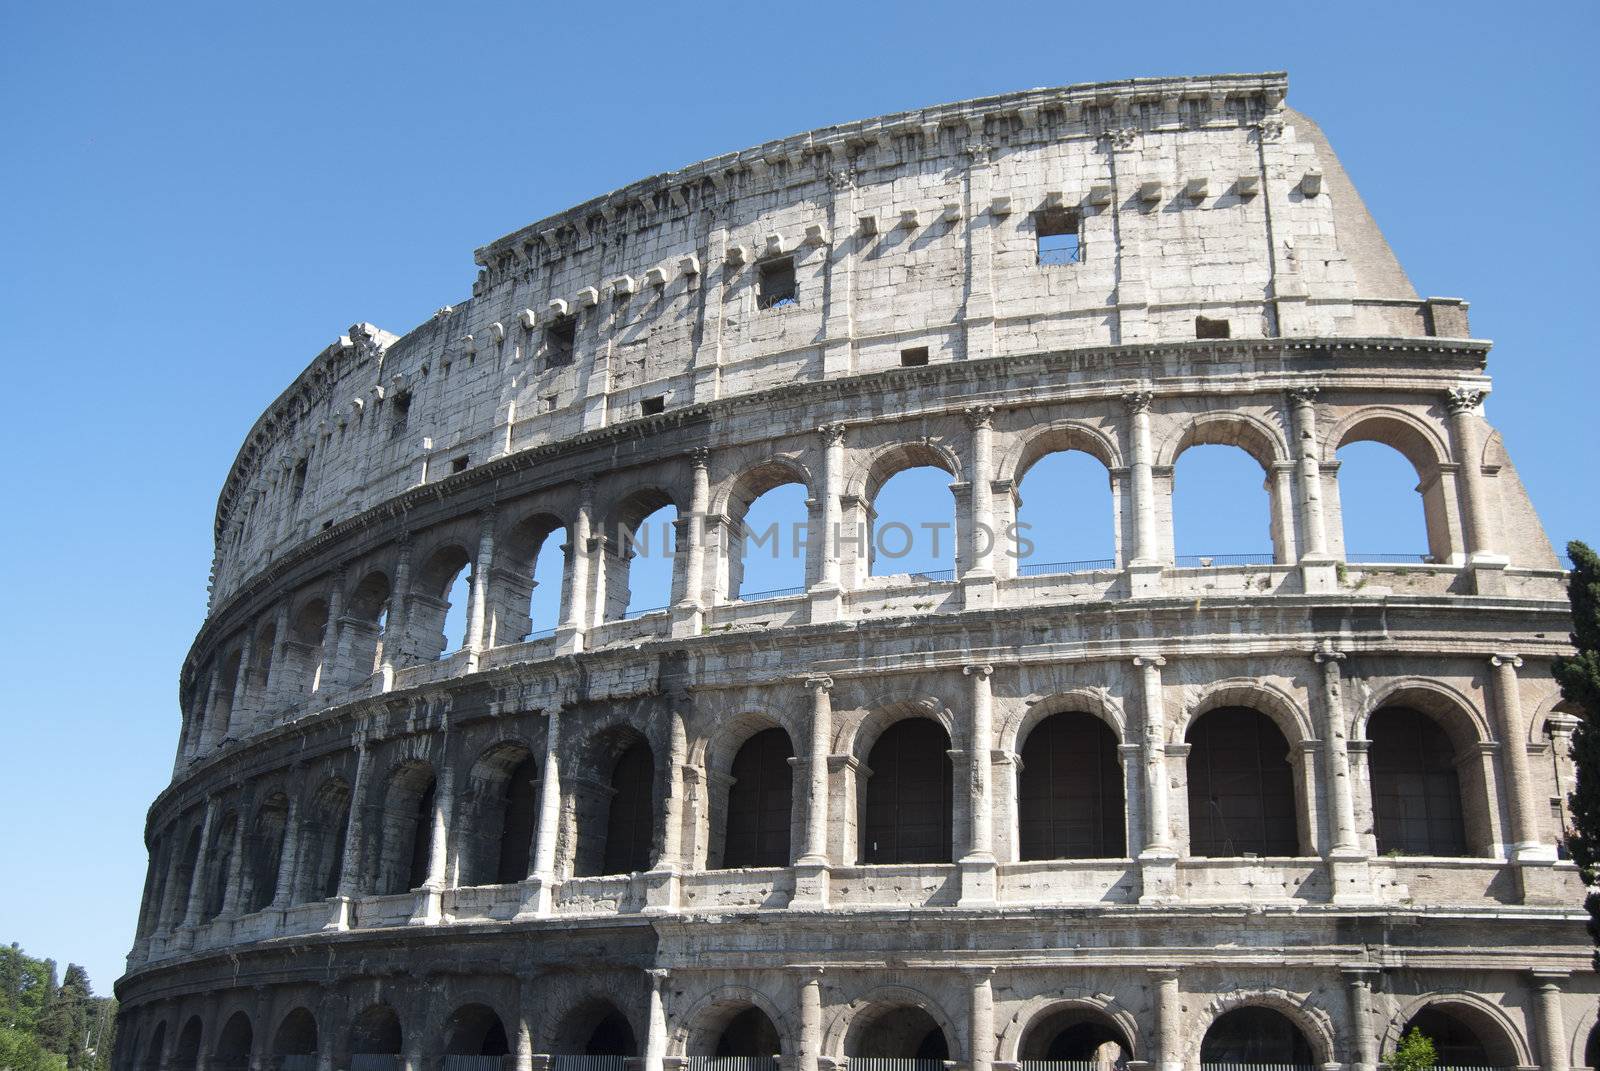 Rome. The Colosseum, romanity's symbol.  It is most famous monument of the city